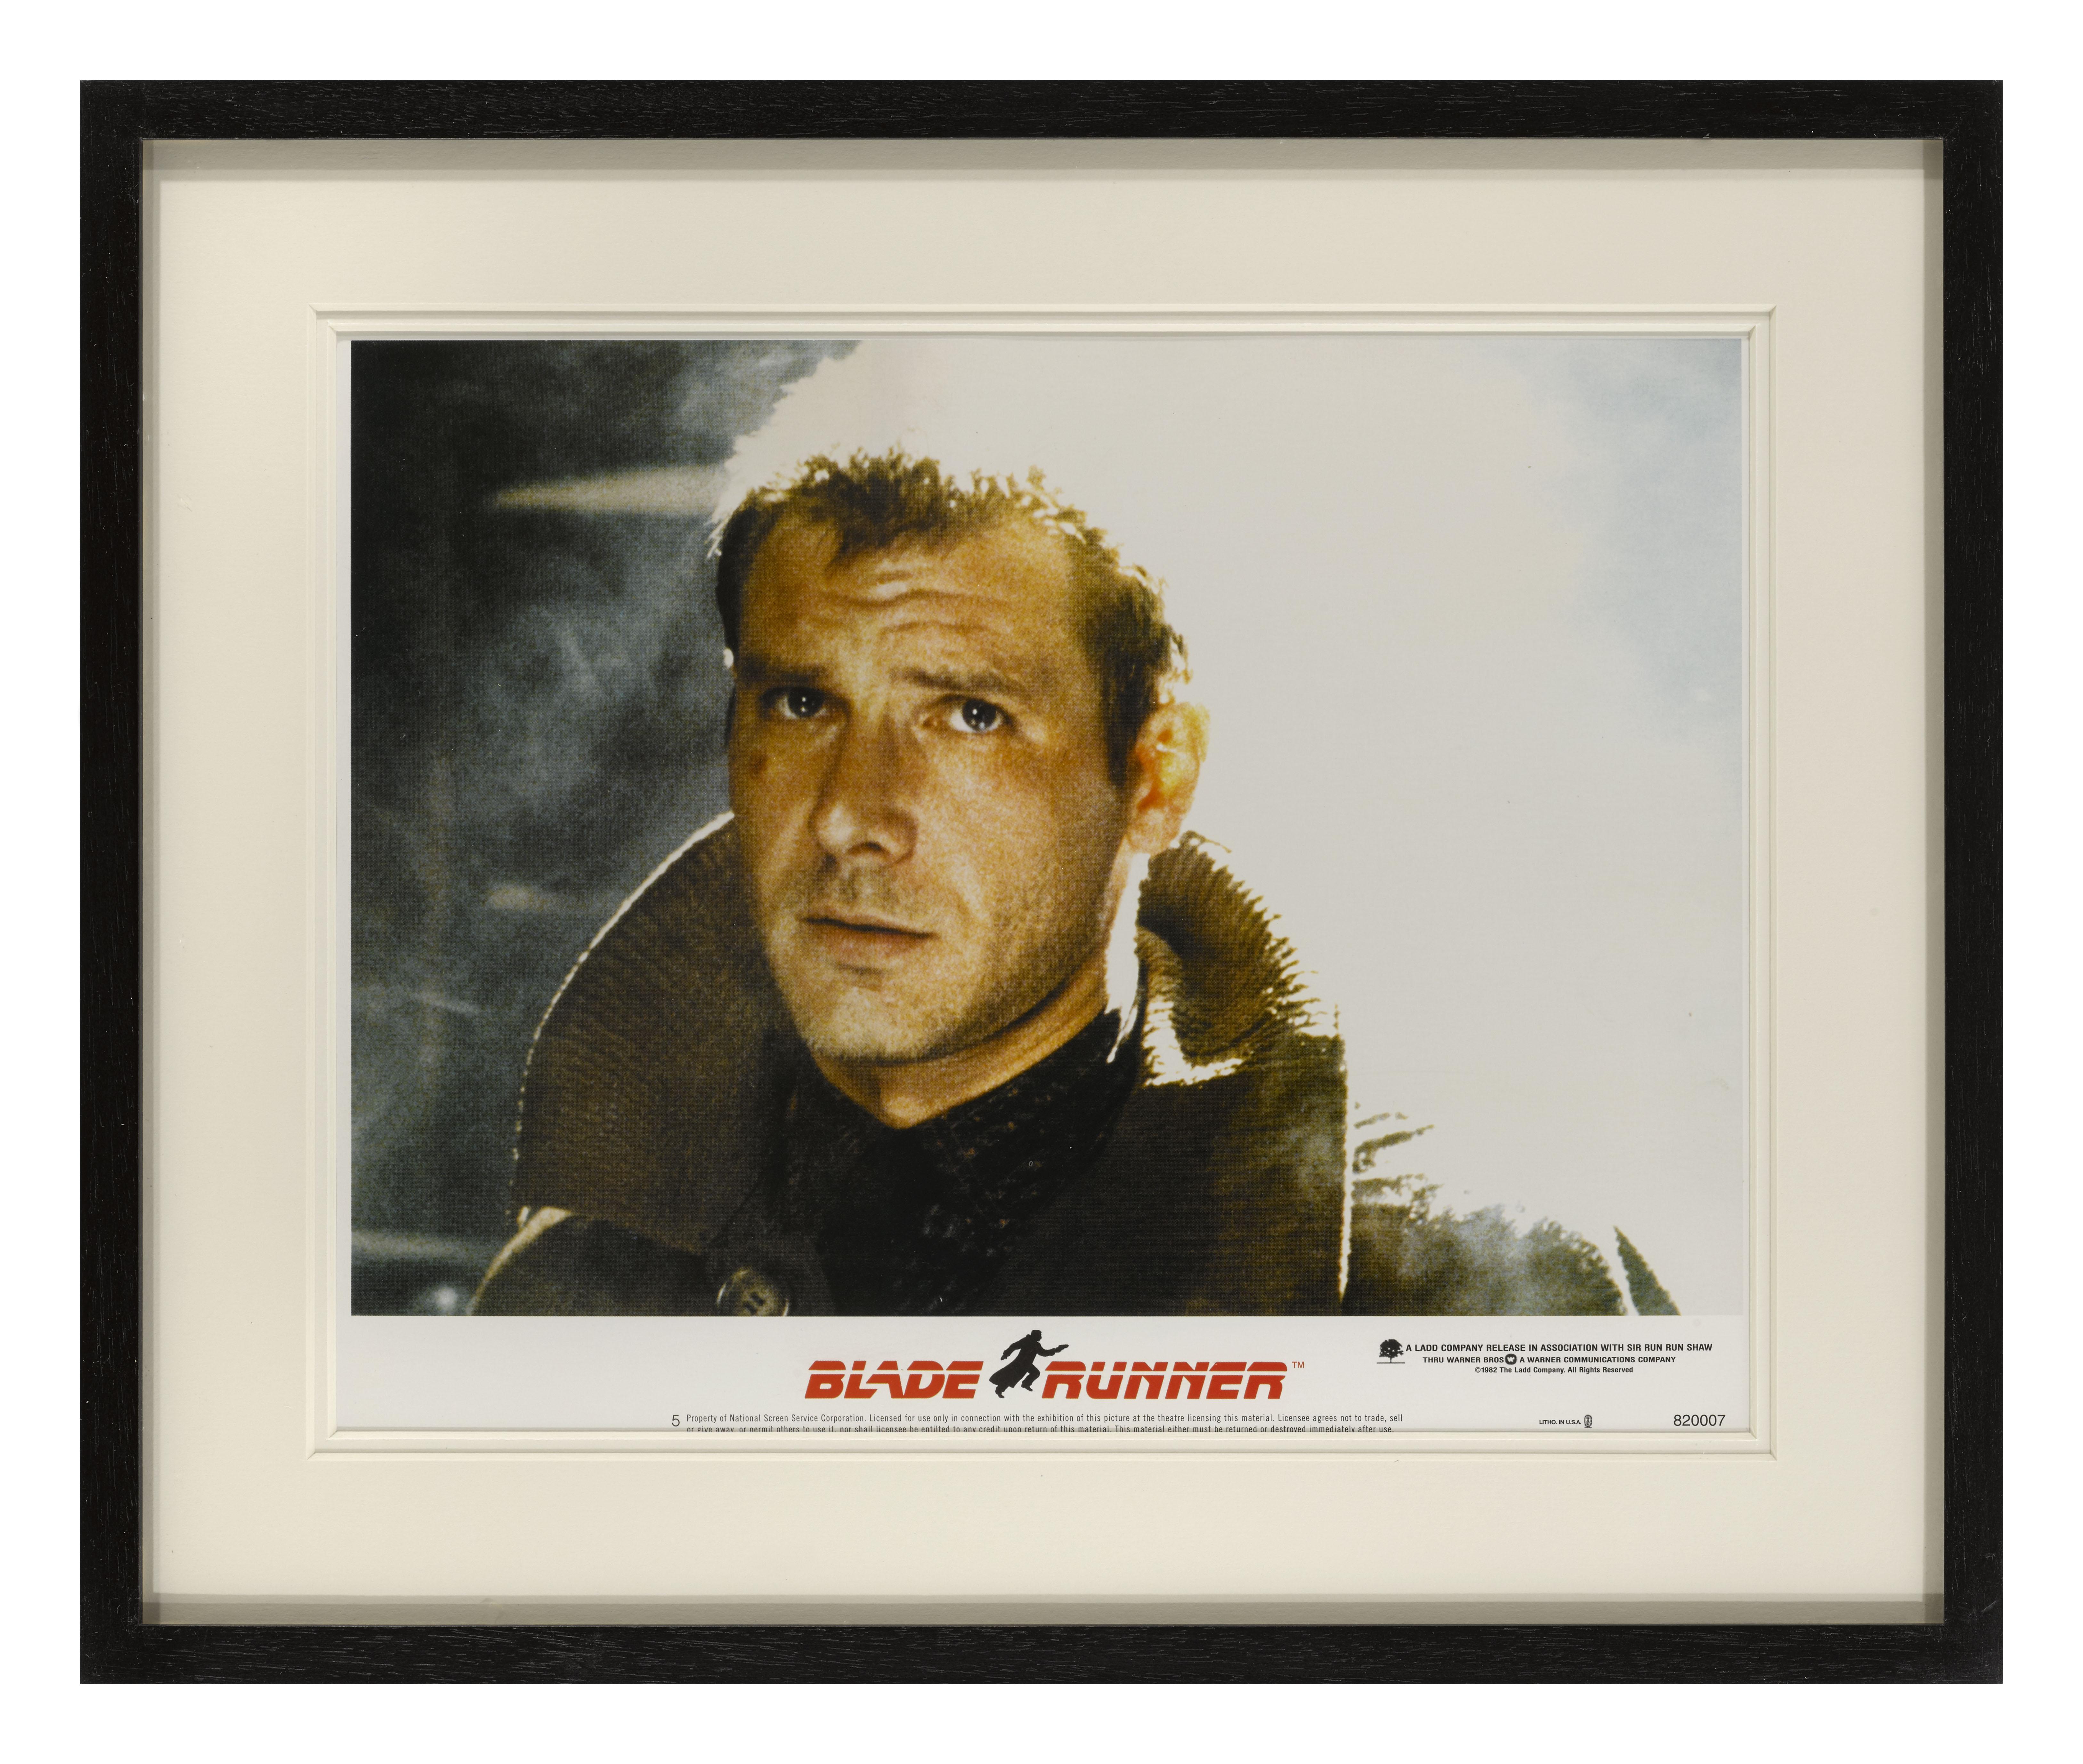 Original US framed lobby card for Ridley Scott's 1980s sci-fi film has become a true cult classic. Thirty-five years on a sequel (Blade Runner 2049) was made, also starring Harrison Ford. This lobby card is conservation framed with UV plexiglass